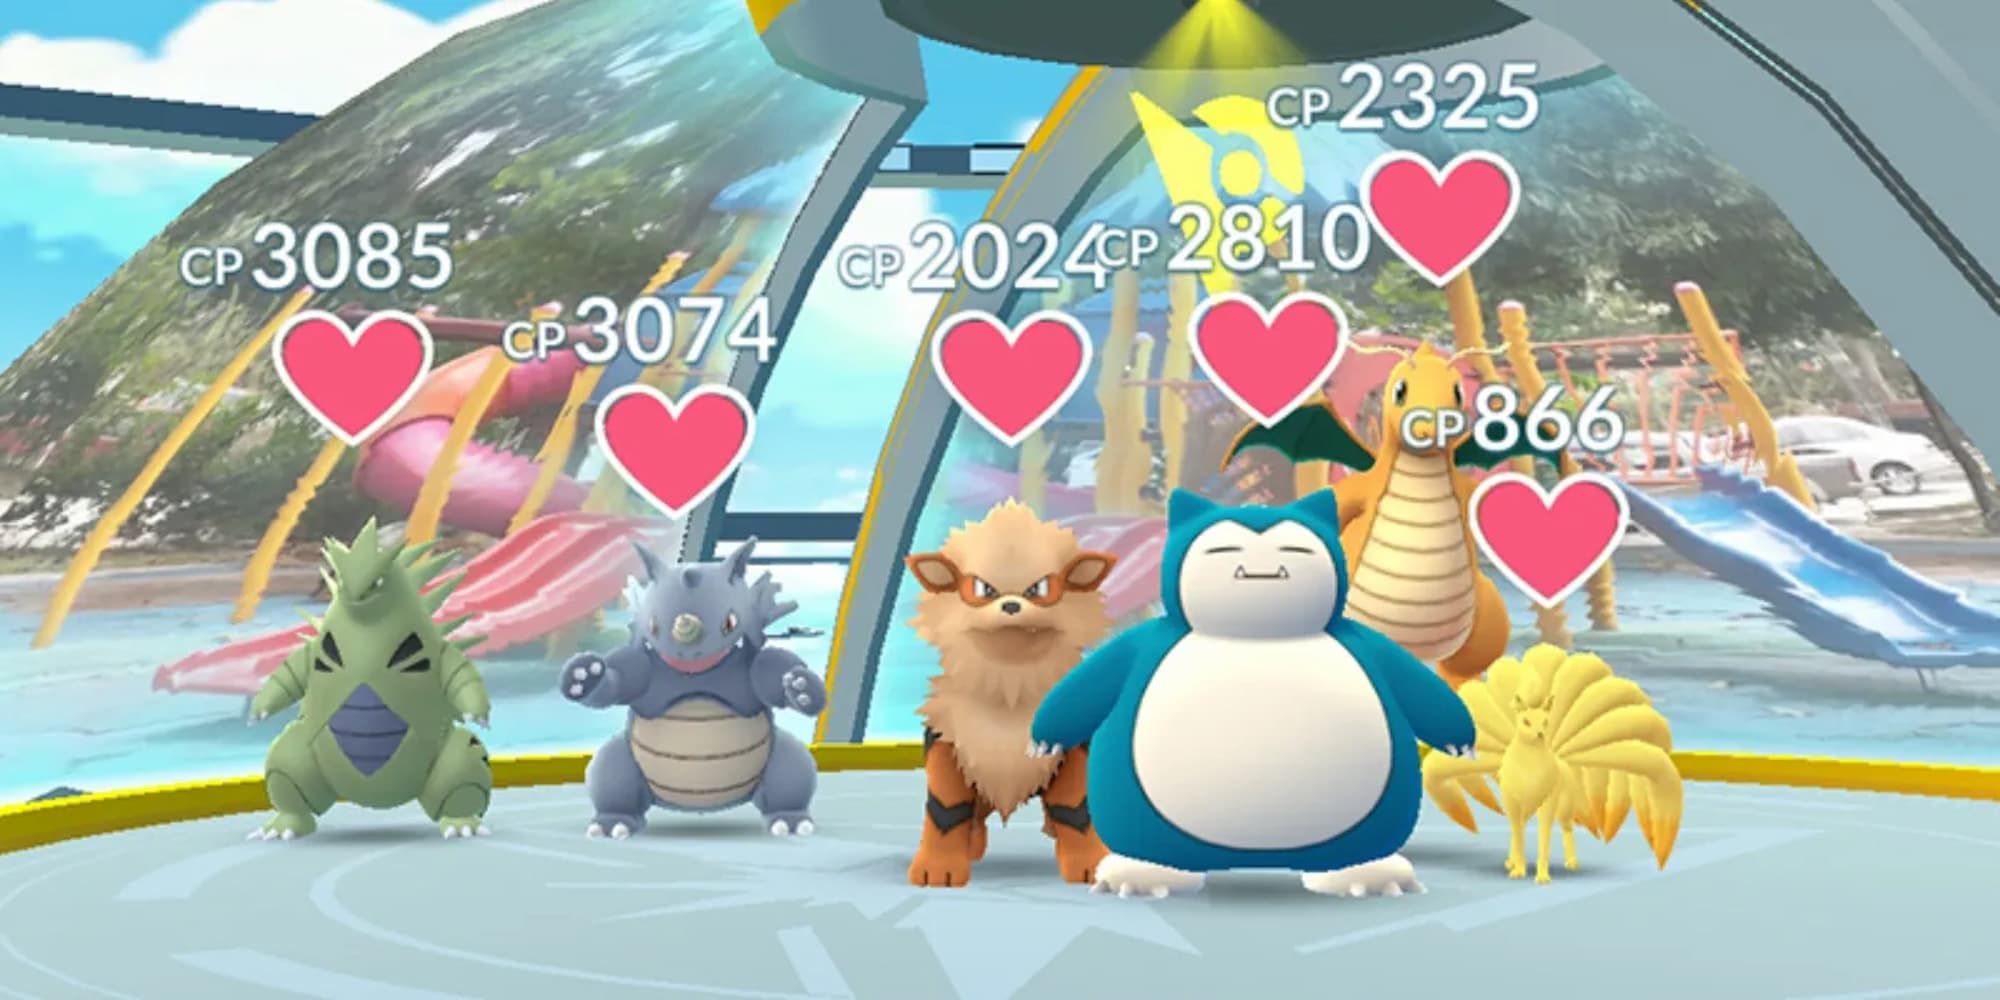 Top 5 hardest Pokemon Gyms of all time